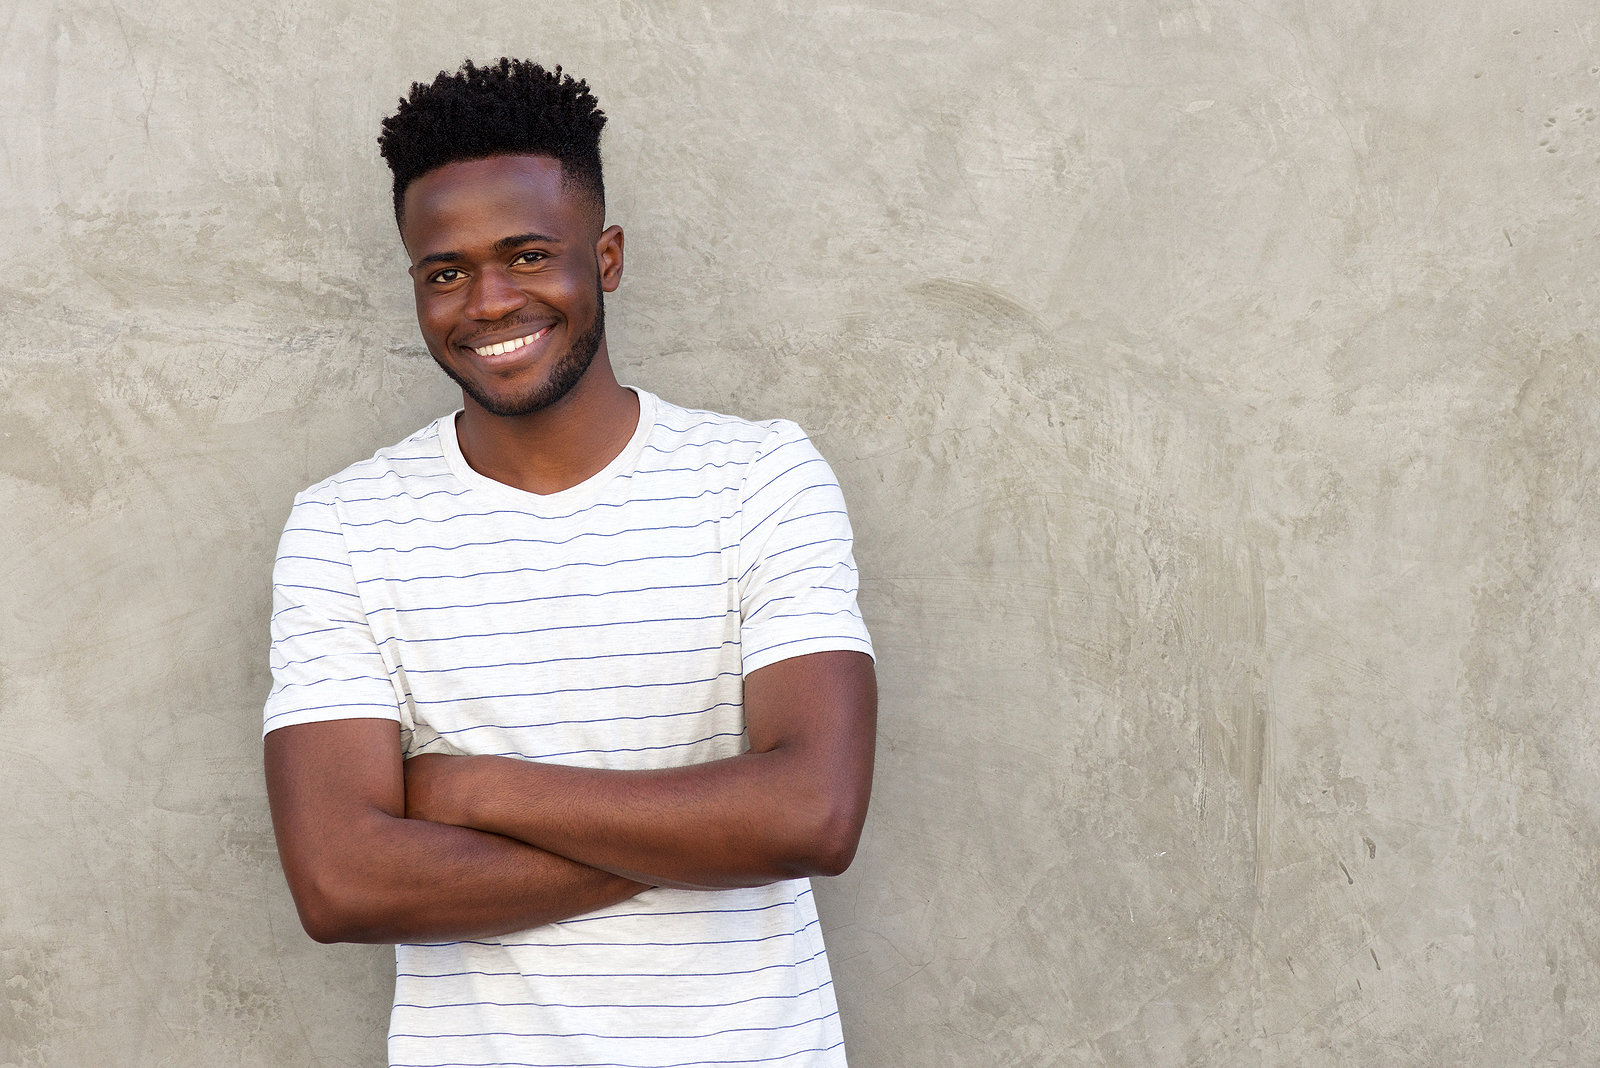 An attractive black guy wearing a striped shirt has his arms crossed with a confident smile, leaning against a wall.